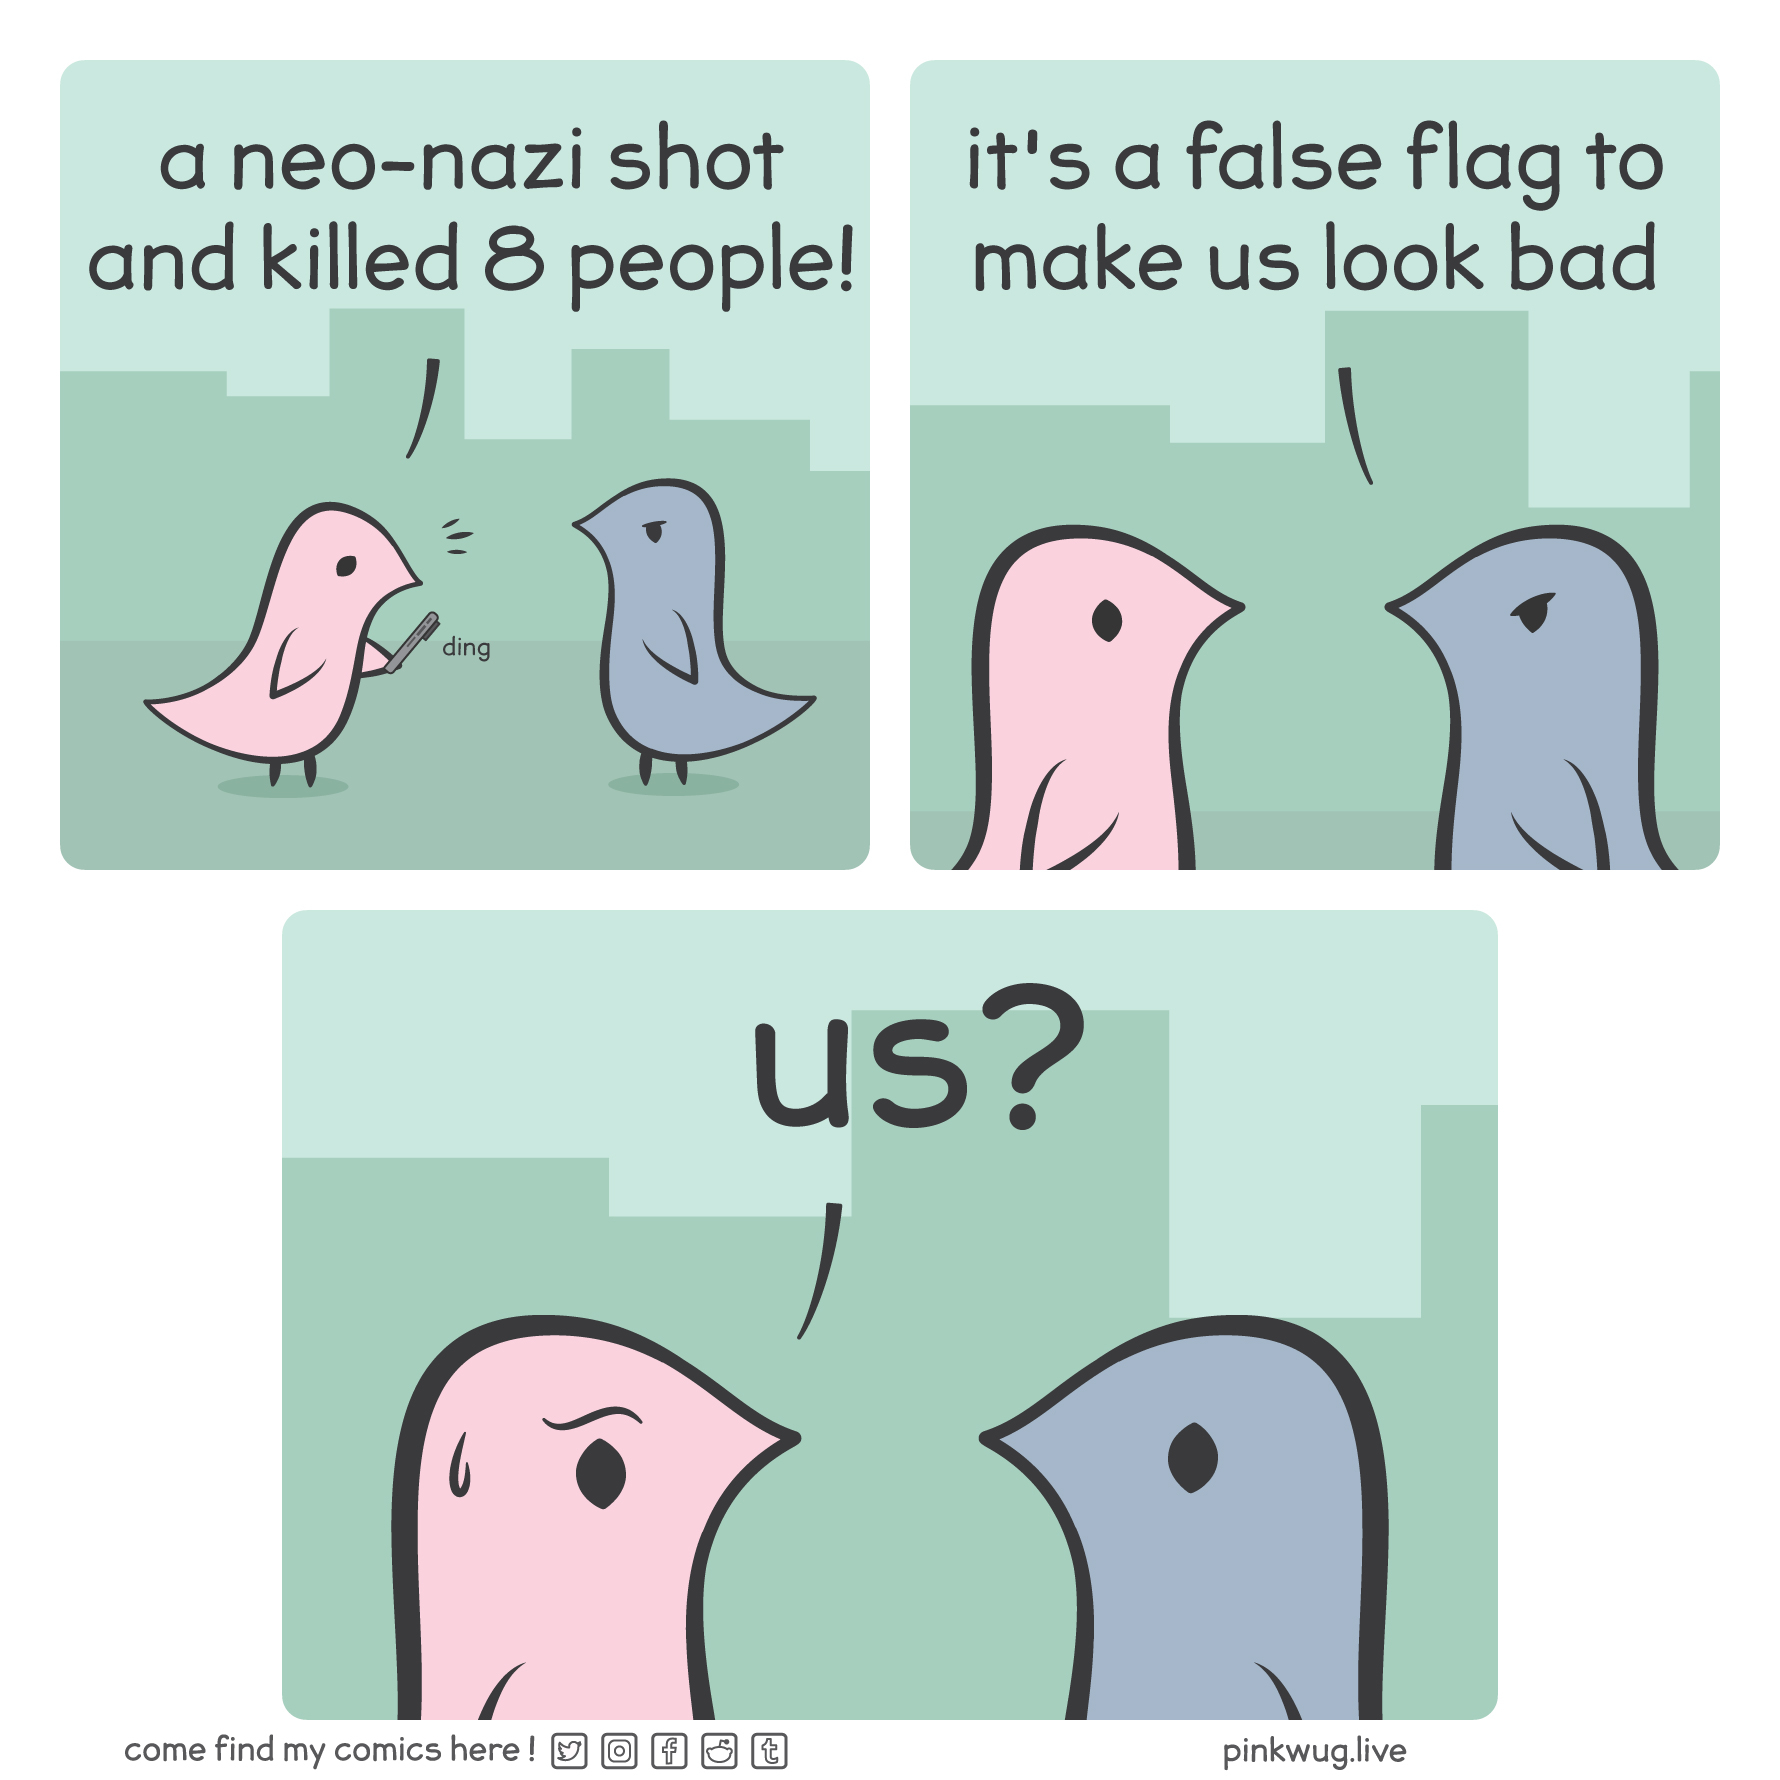 pinkwug comic: Panel 1: a pink wug, alerted by his phone, says: "a neo-nazi shot and killed 8 people!"

Panel 2: a grey wug interrupts and says: "it's a false flag to make us look bad"

Panel 3: the pink wug, worried and suspicious, asks: "us?"